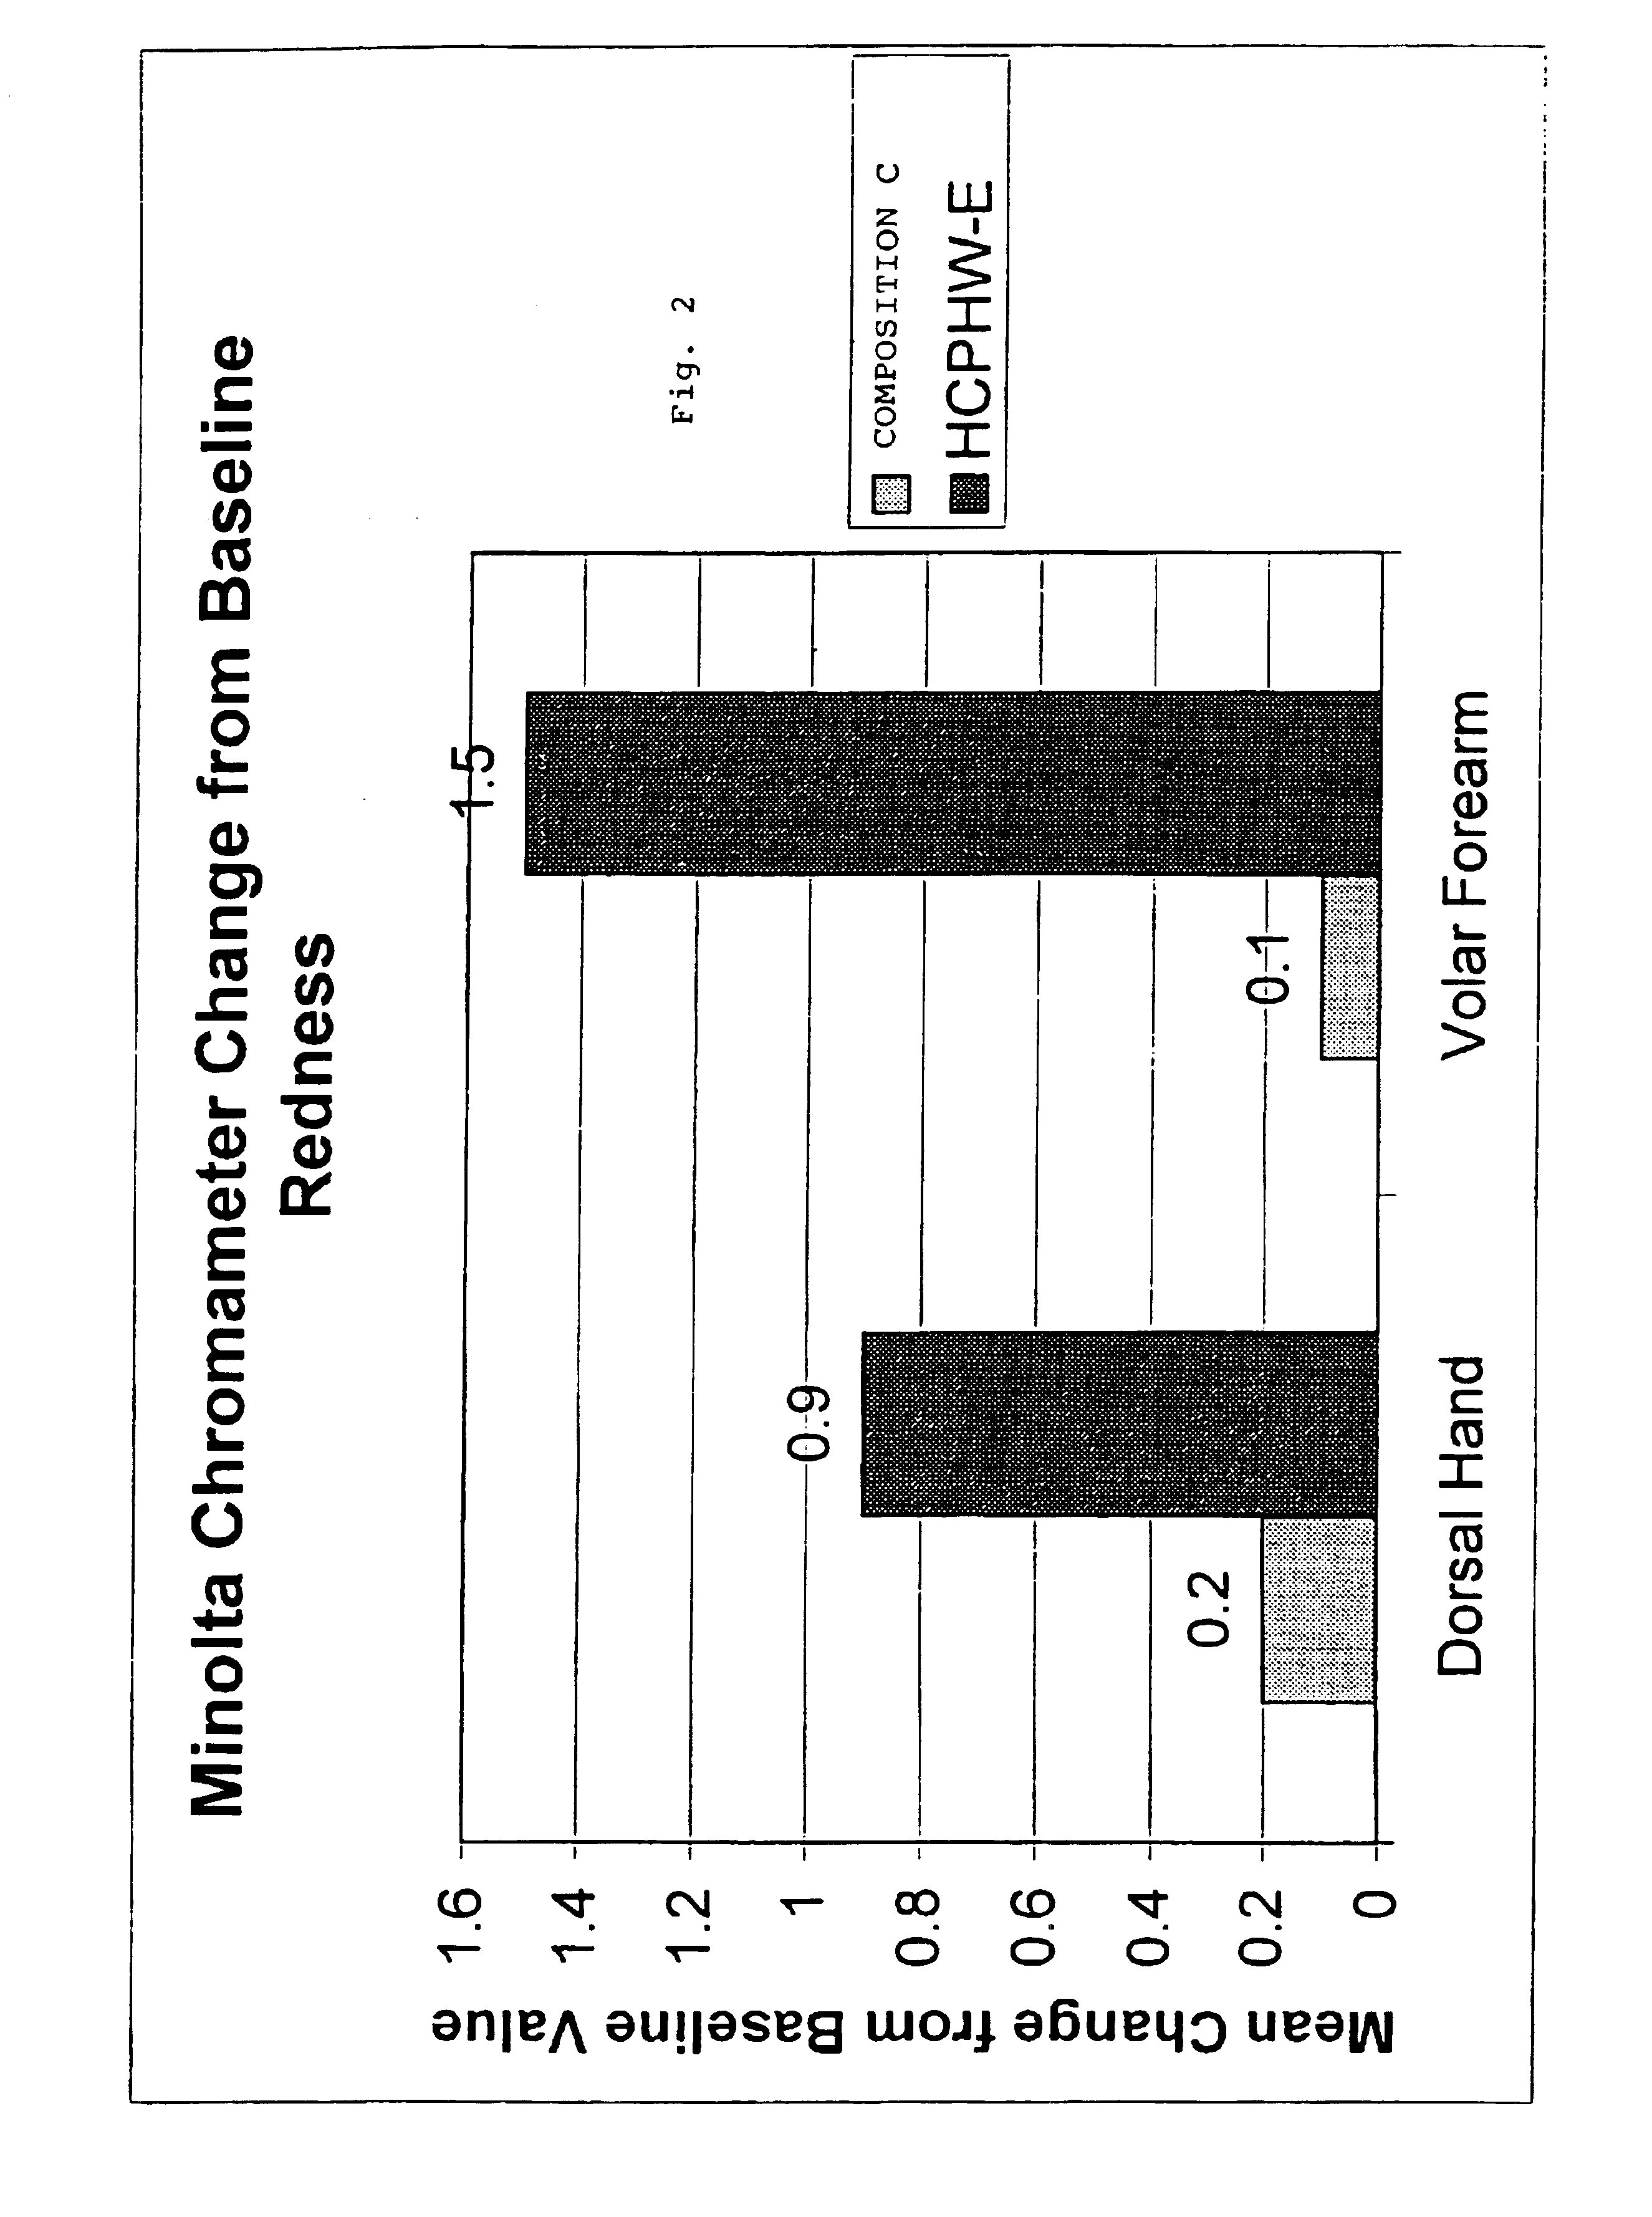 High efficacy antibacterial compositions having enhanced esthetic and skin care properties